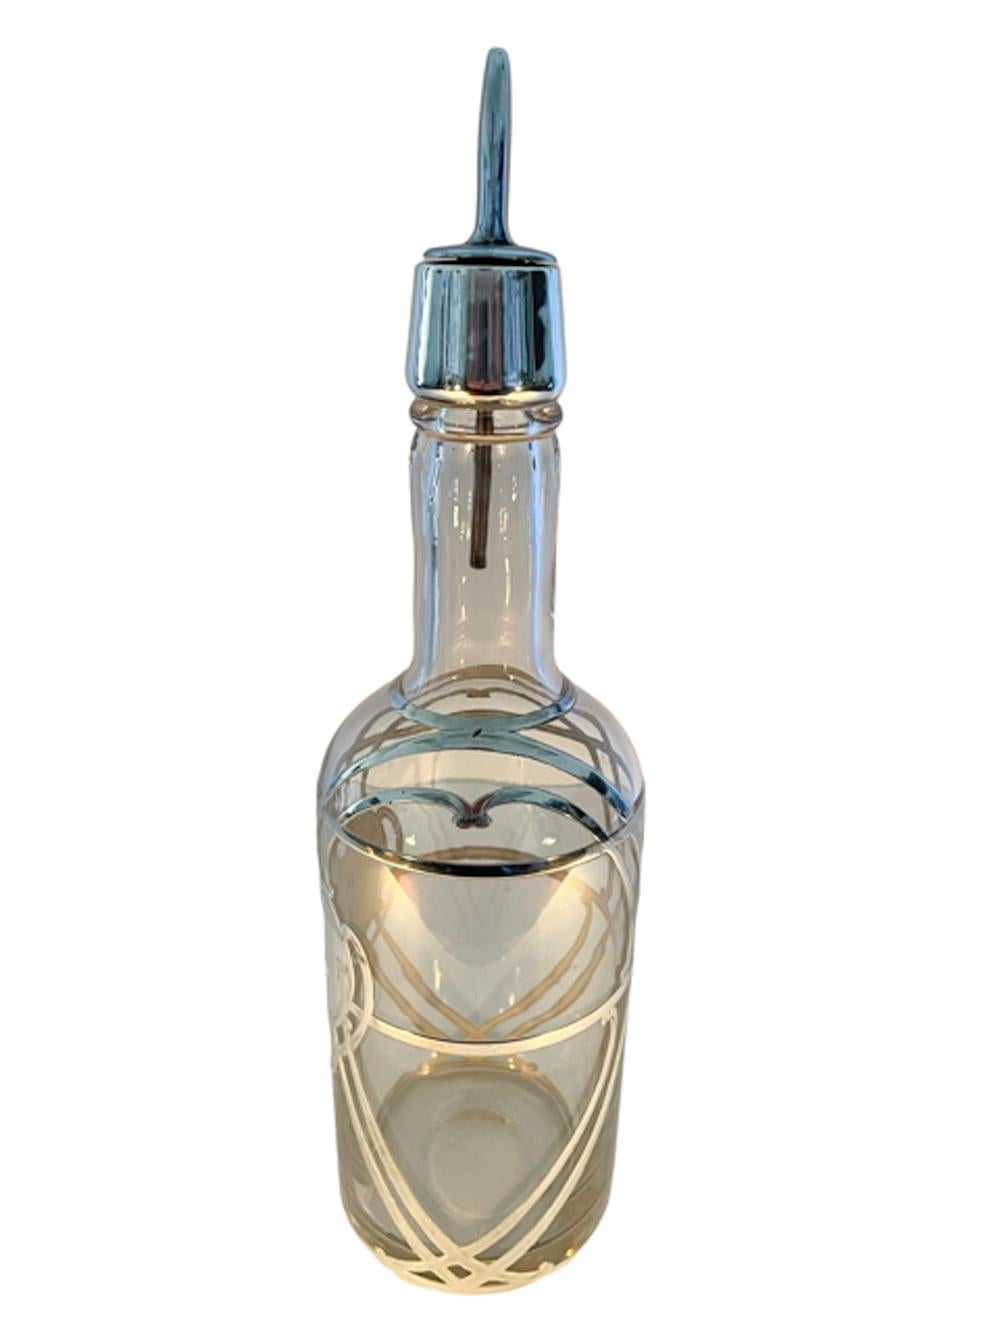 A silver overlay decanter or back bar bottle in clear glass with a polished pontil having a silver overlaid collar and large monogrammed central shield shaped cartouche with strapwork continuing around the bottle and over the shoulder. The bottle is